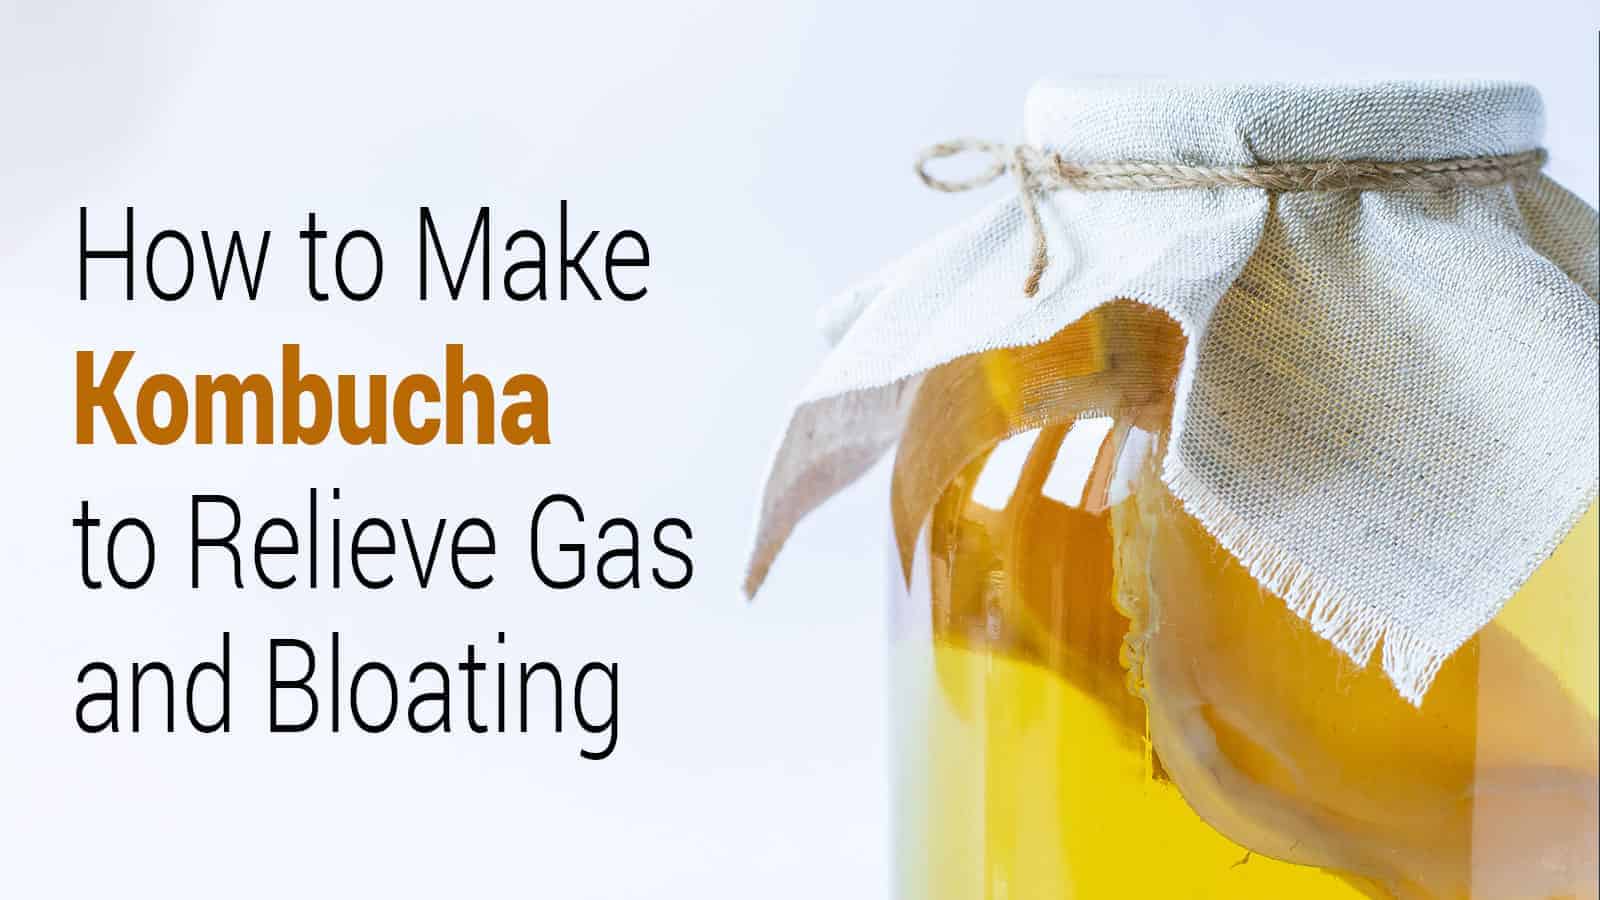 How to Make Kombucha to Relieve Gas and Bloating